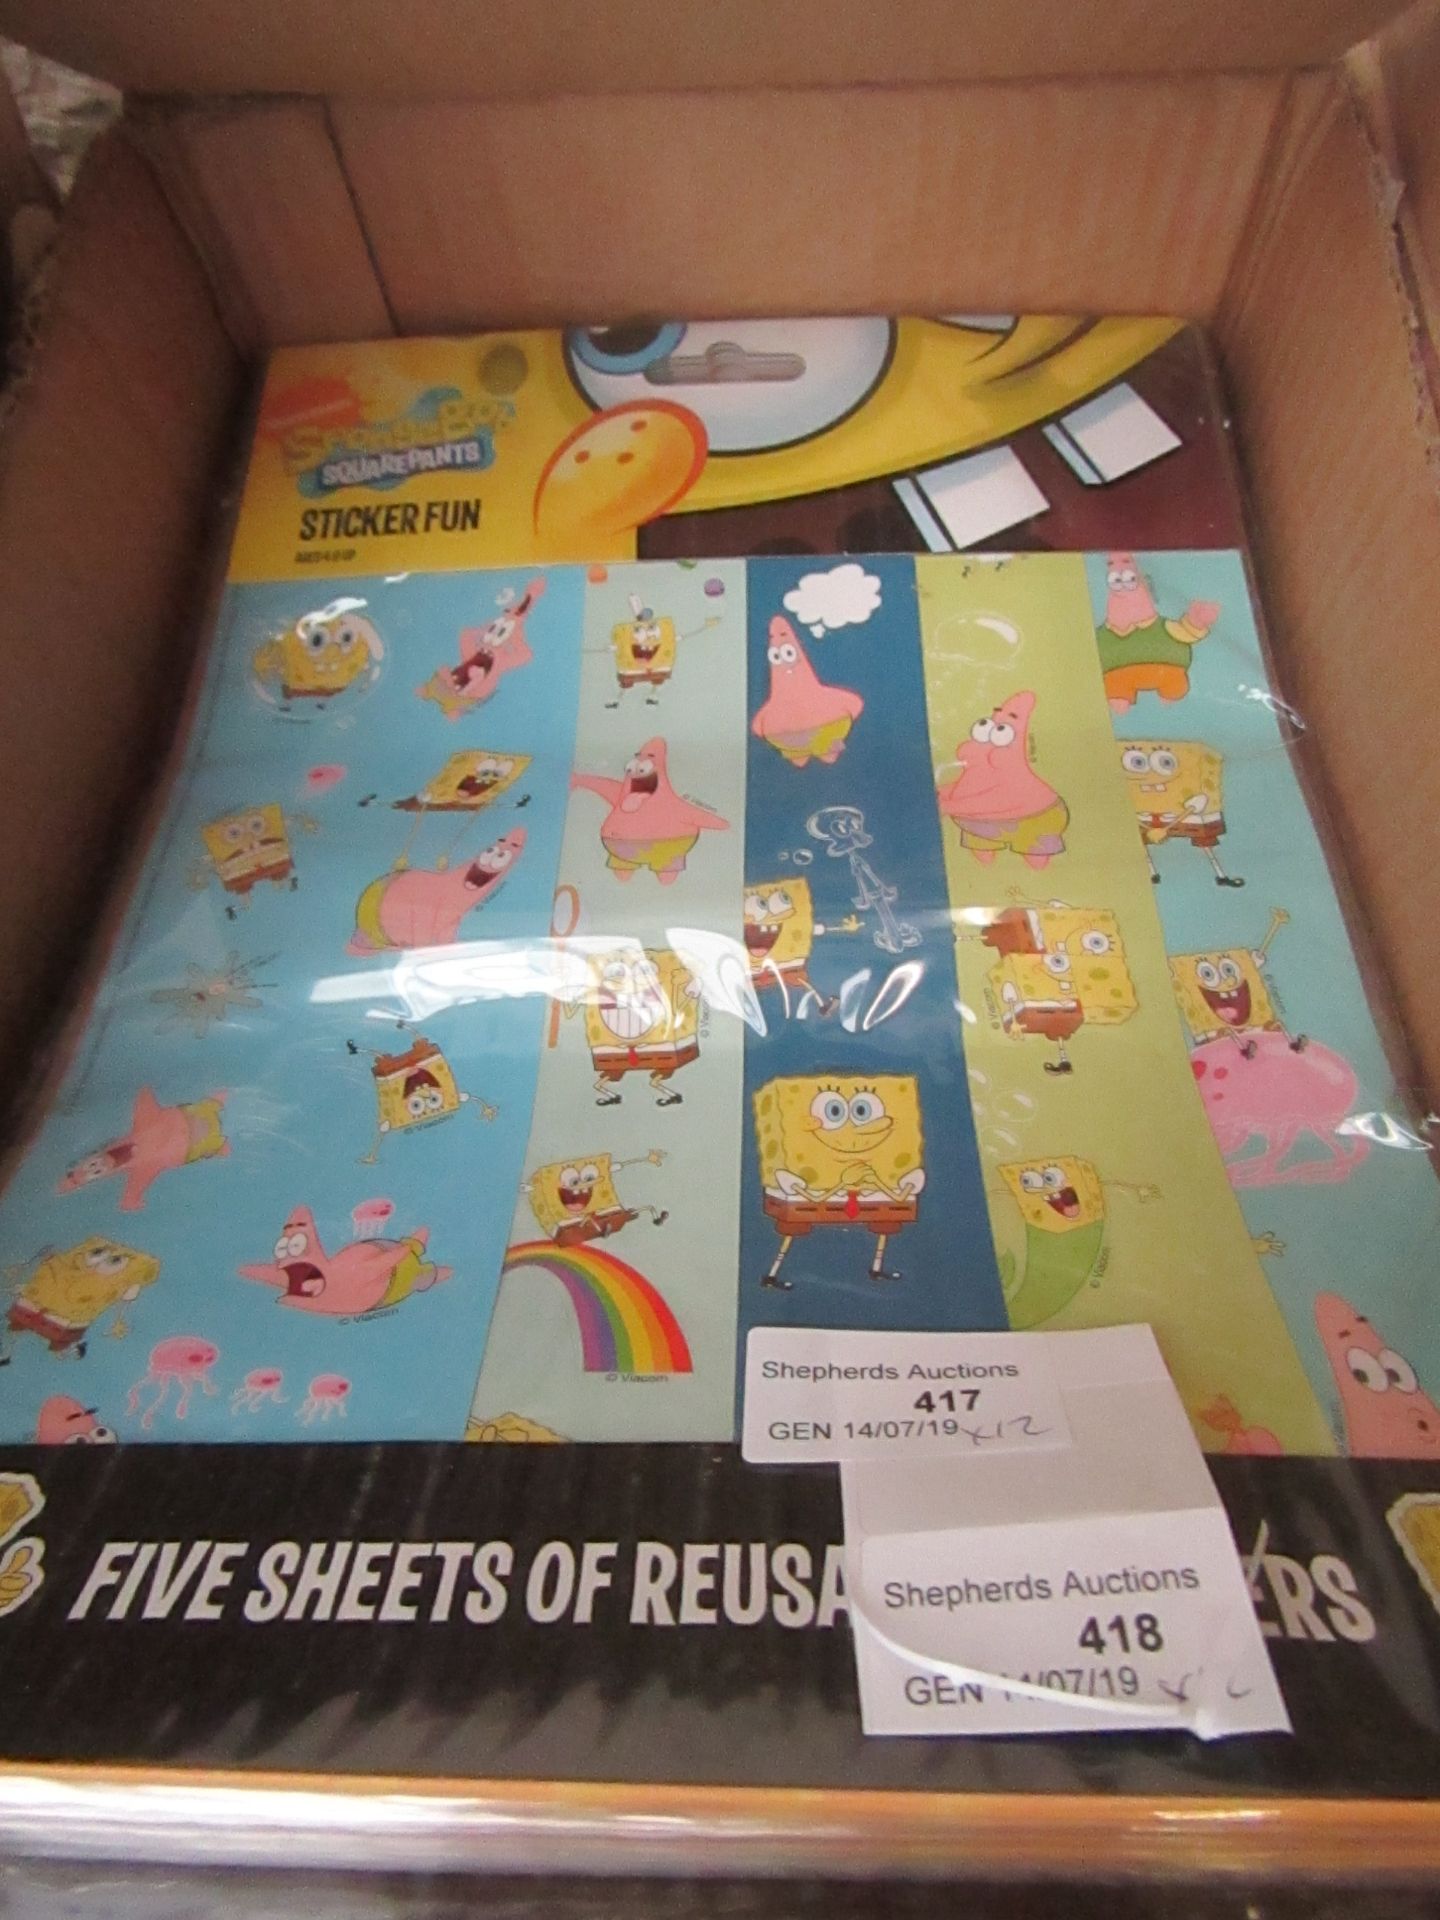 12 x Nickelodeon SpongeBob SquarePants sticker fun,for ages 4 & up,new in packaging